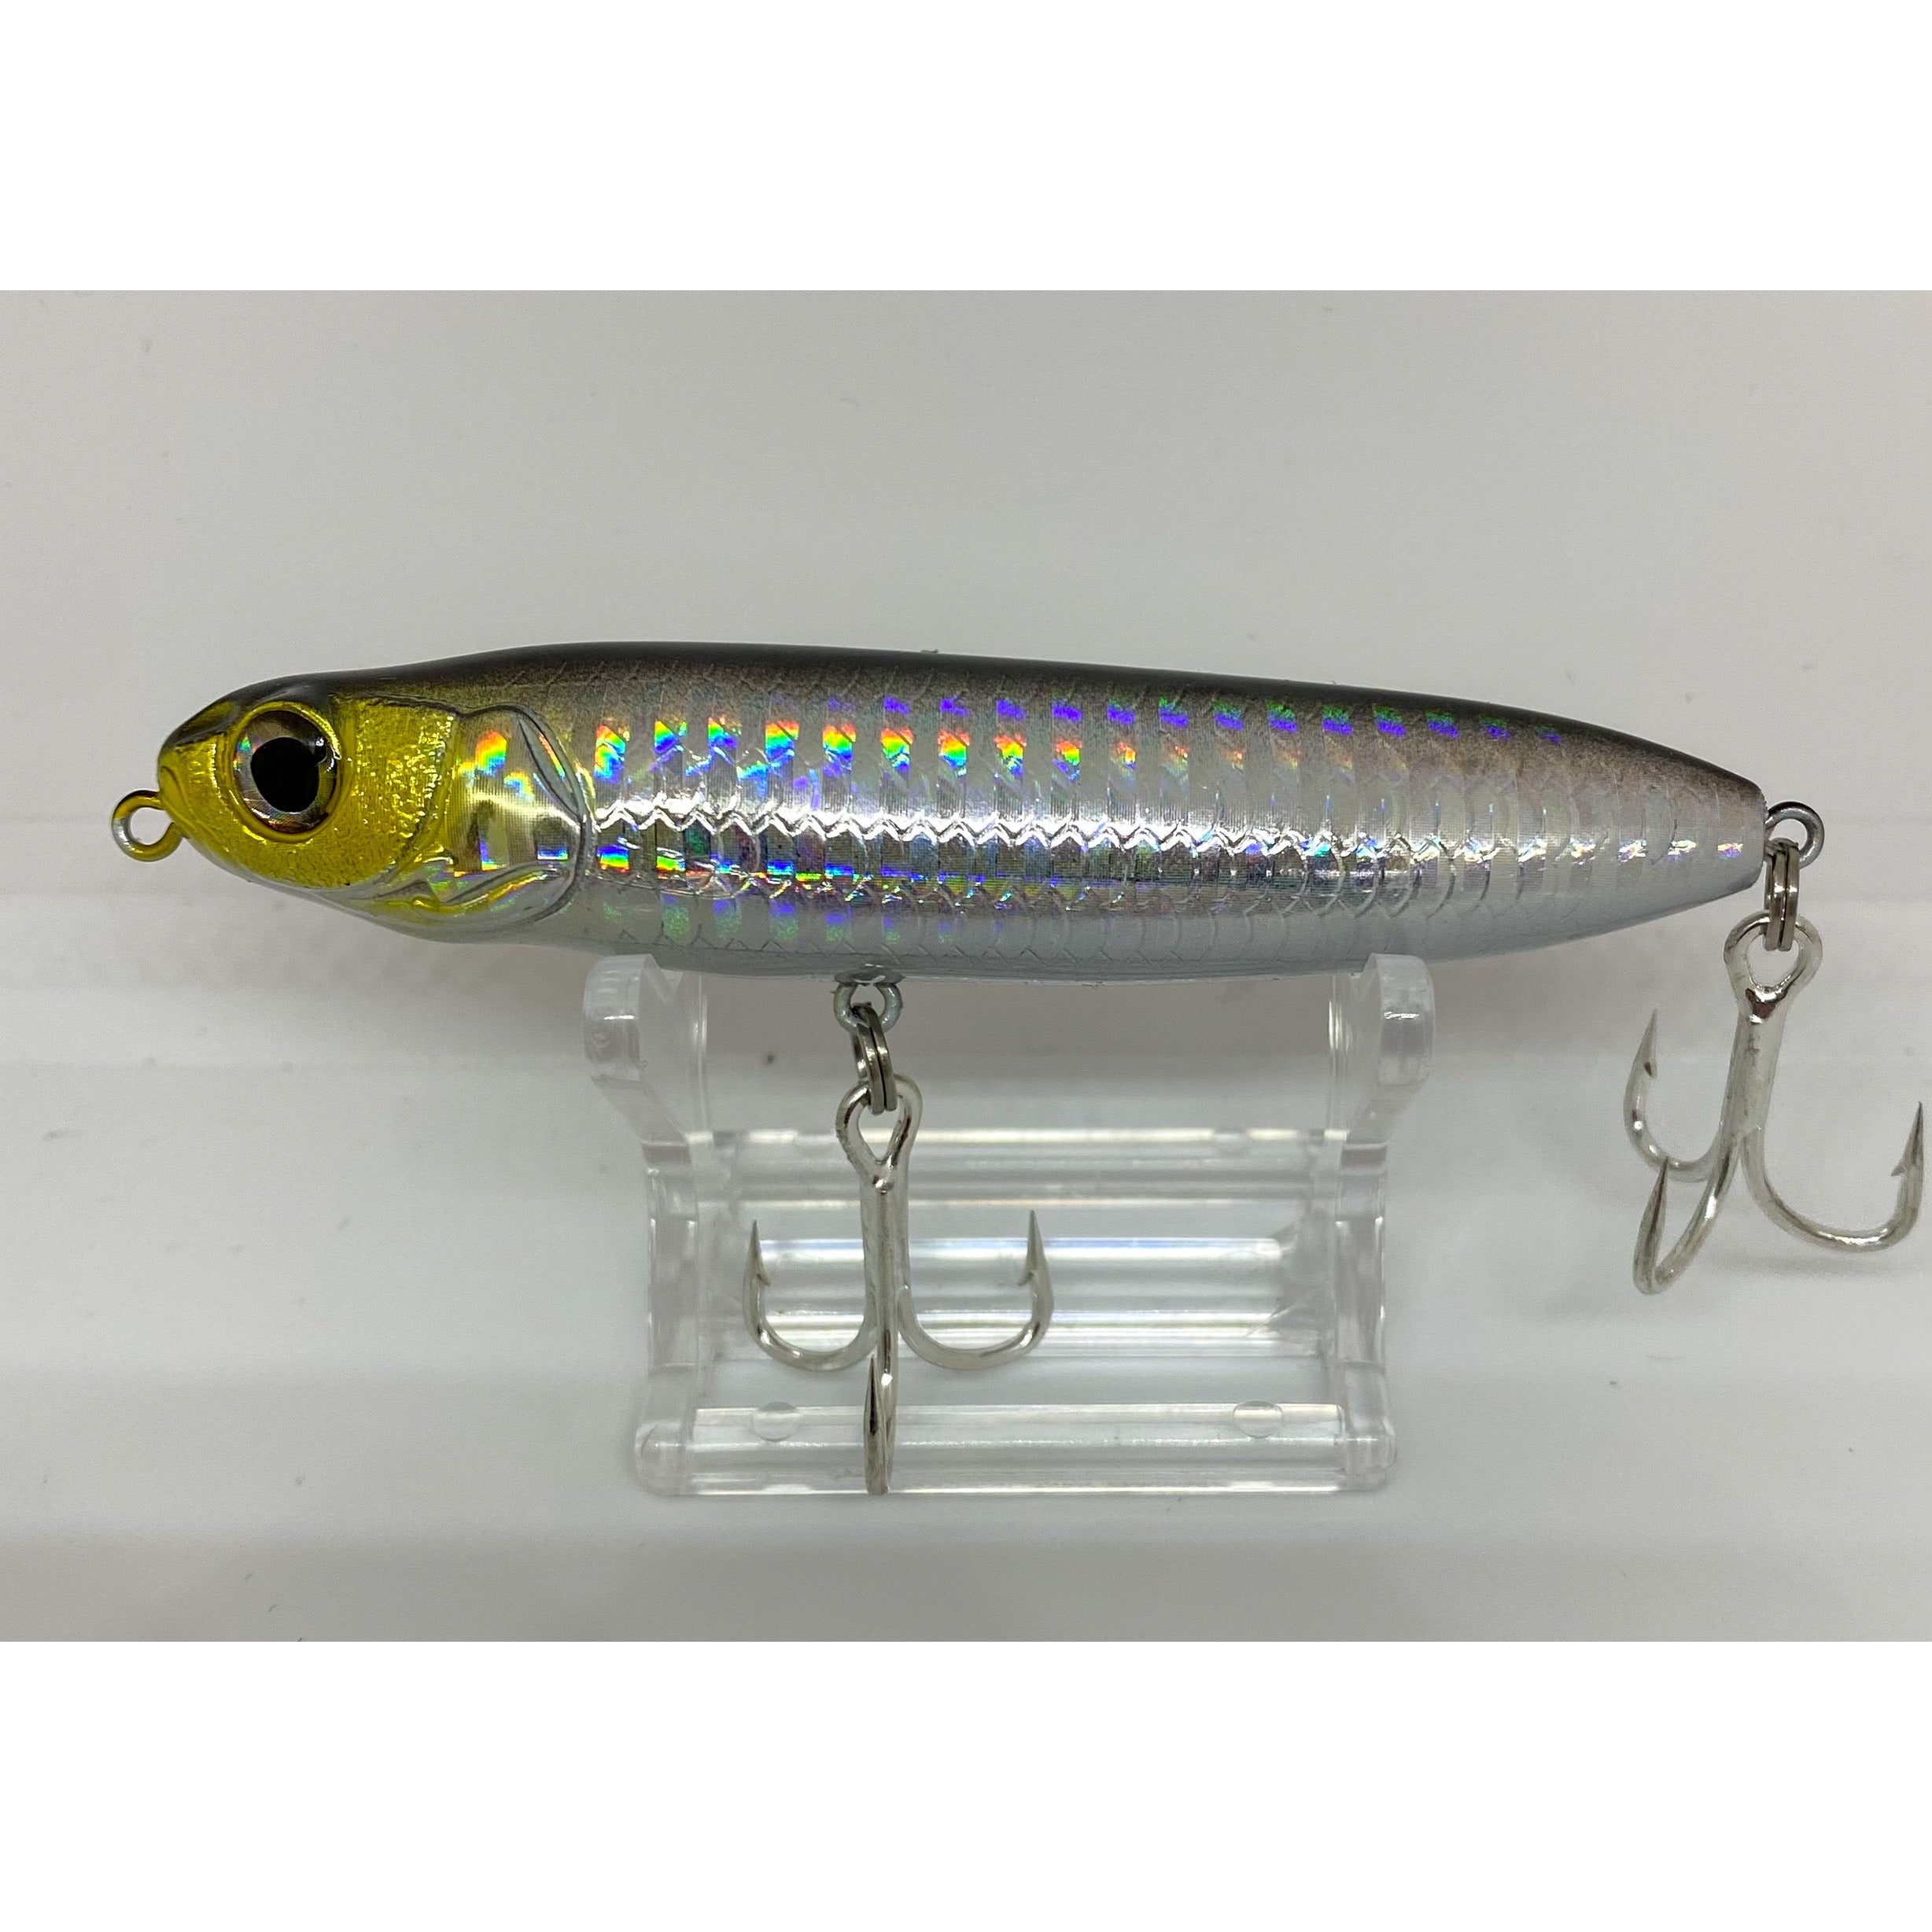 Small Chap Surface Topwater Lure 90mm 16g